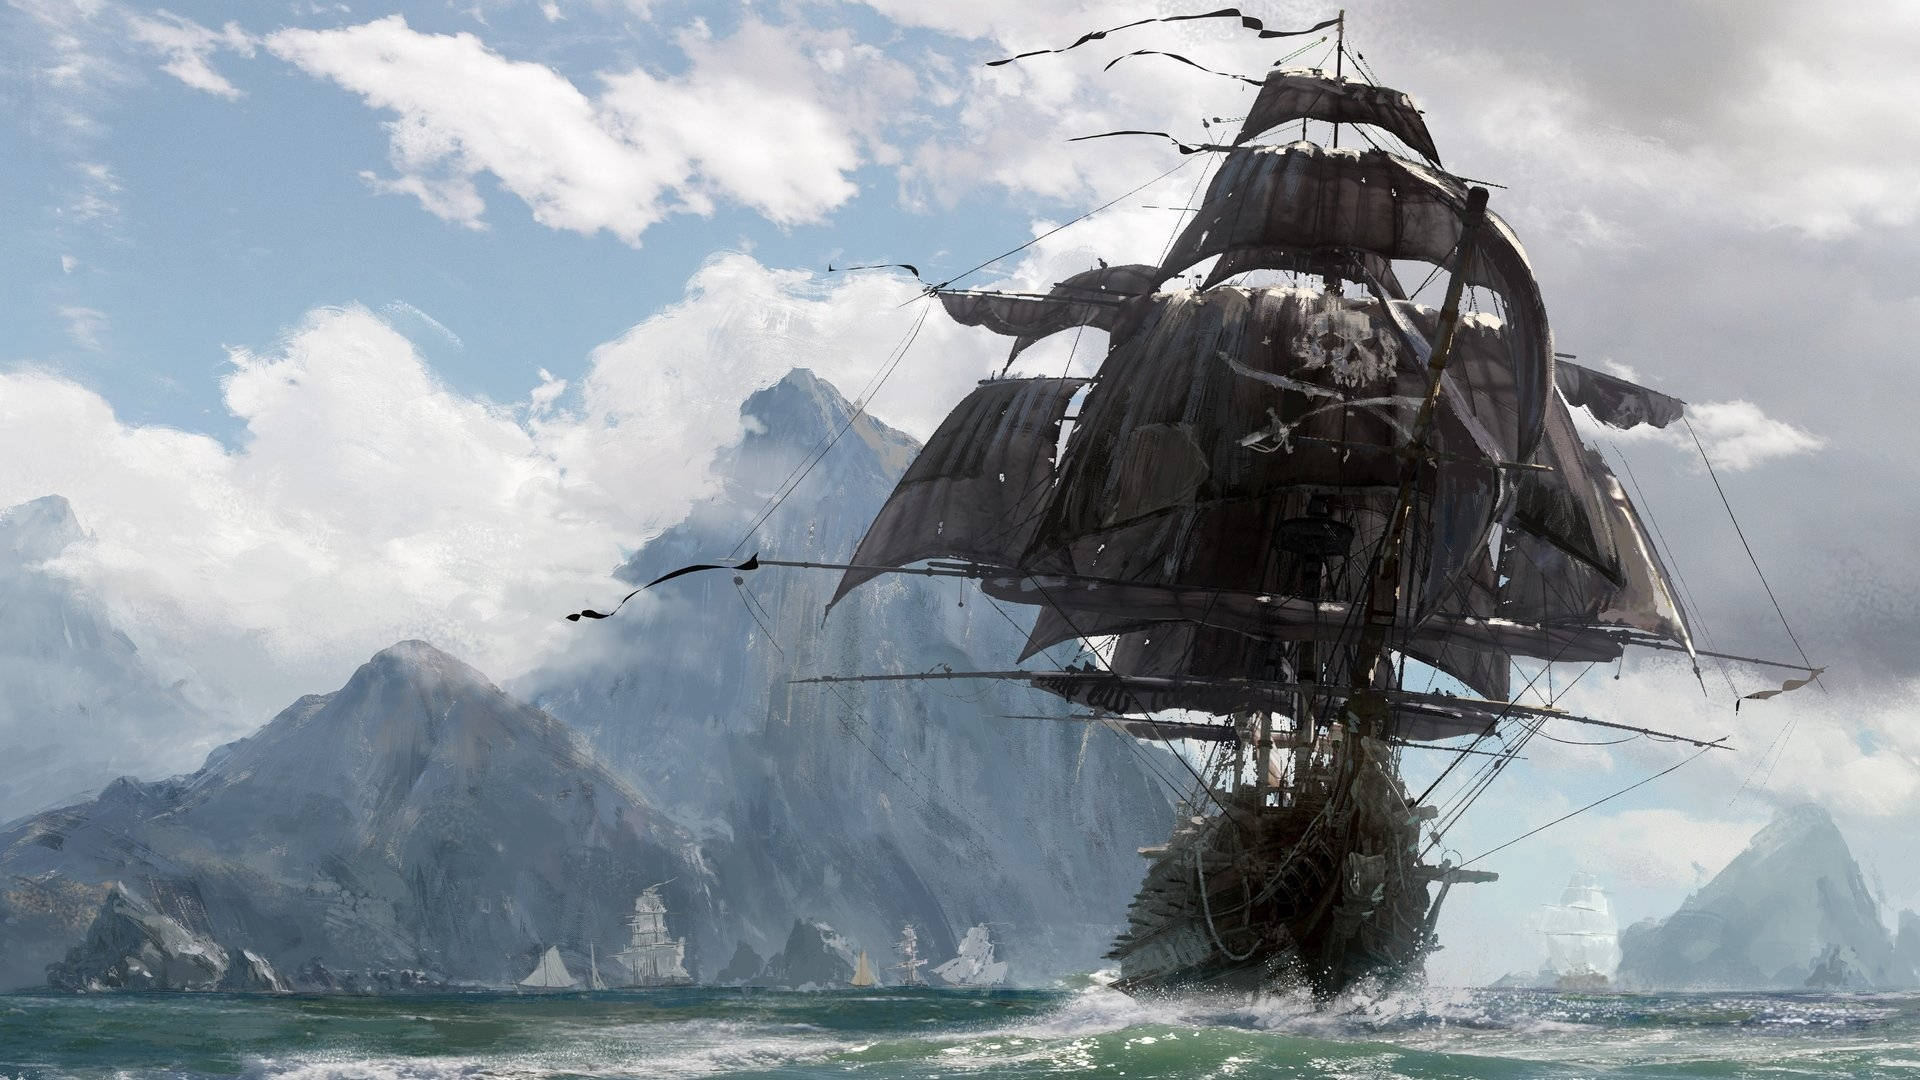 Free Pirate Ship Wallpaper Downloads, [100+] Pirate Ship Wallpapers for  FREE 